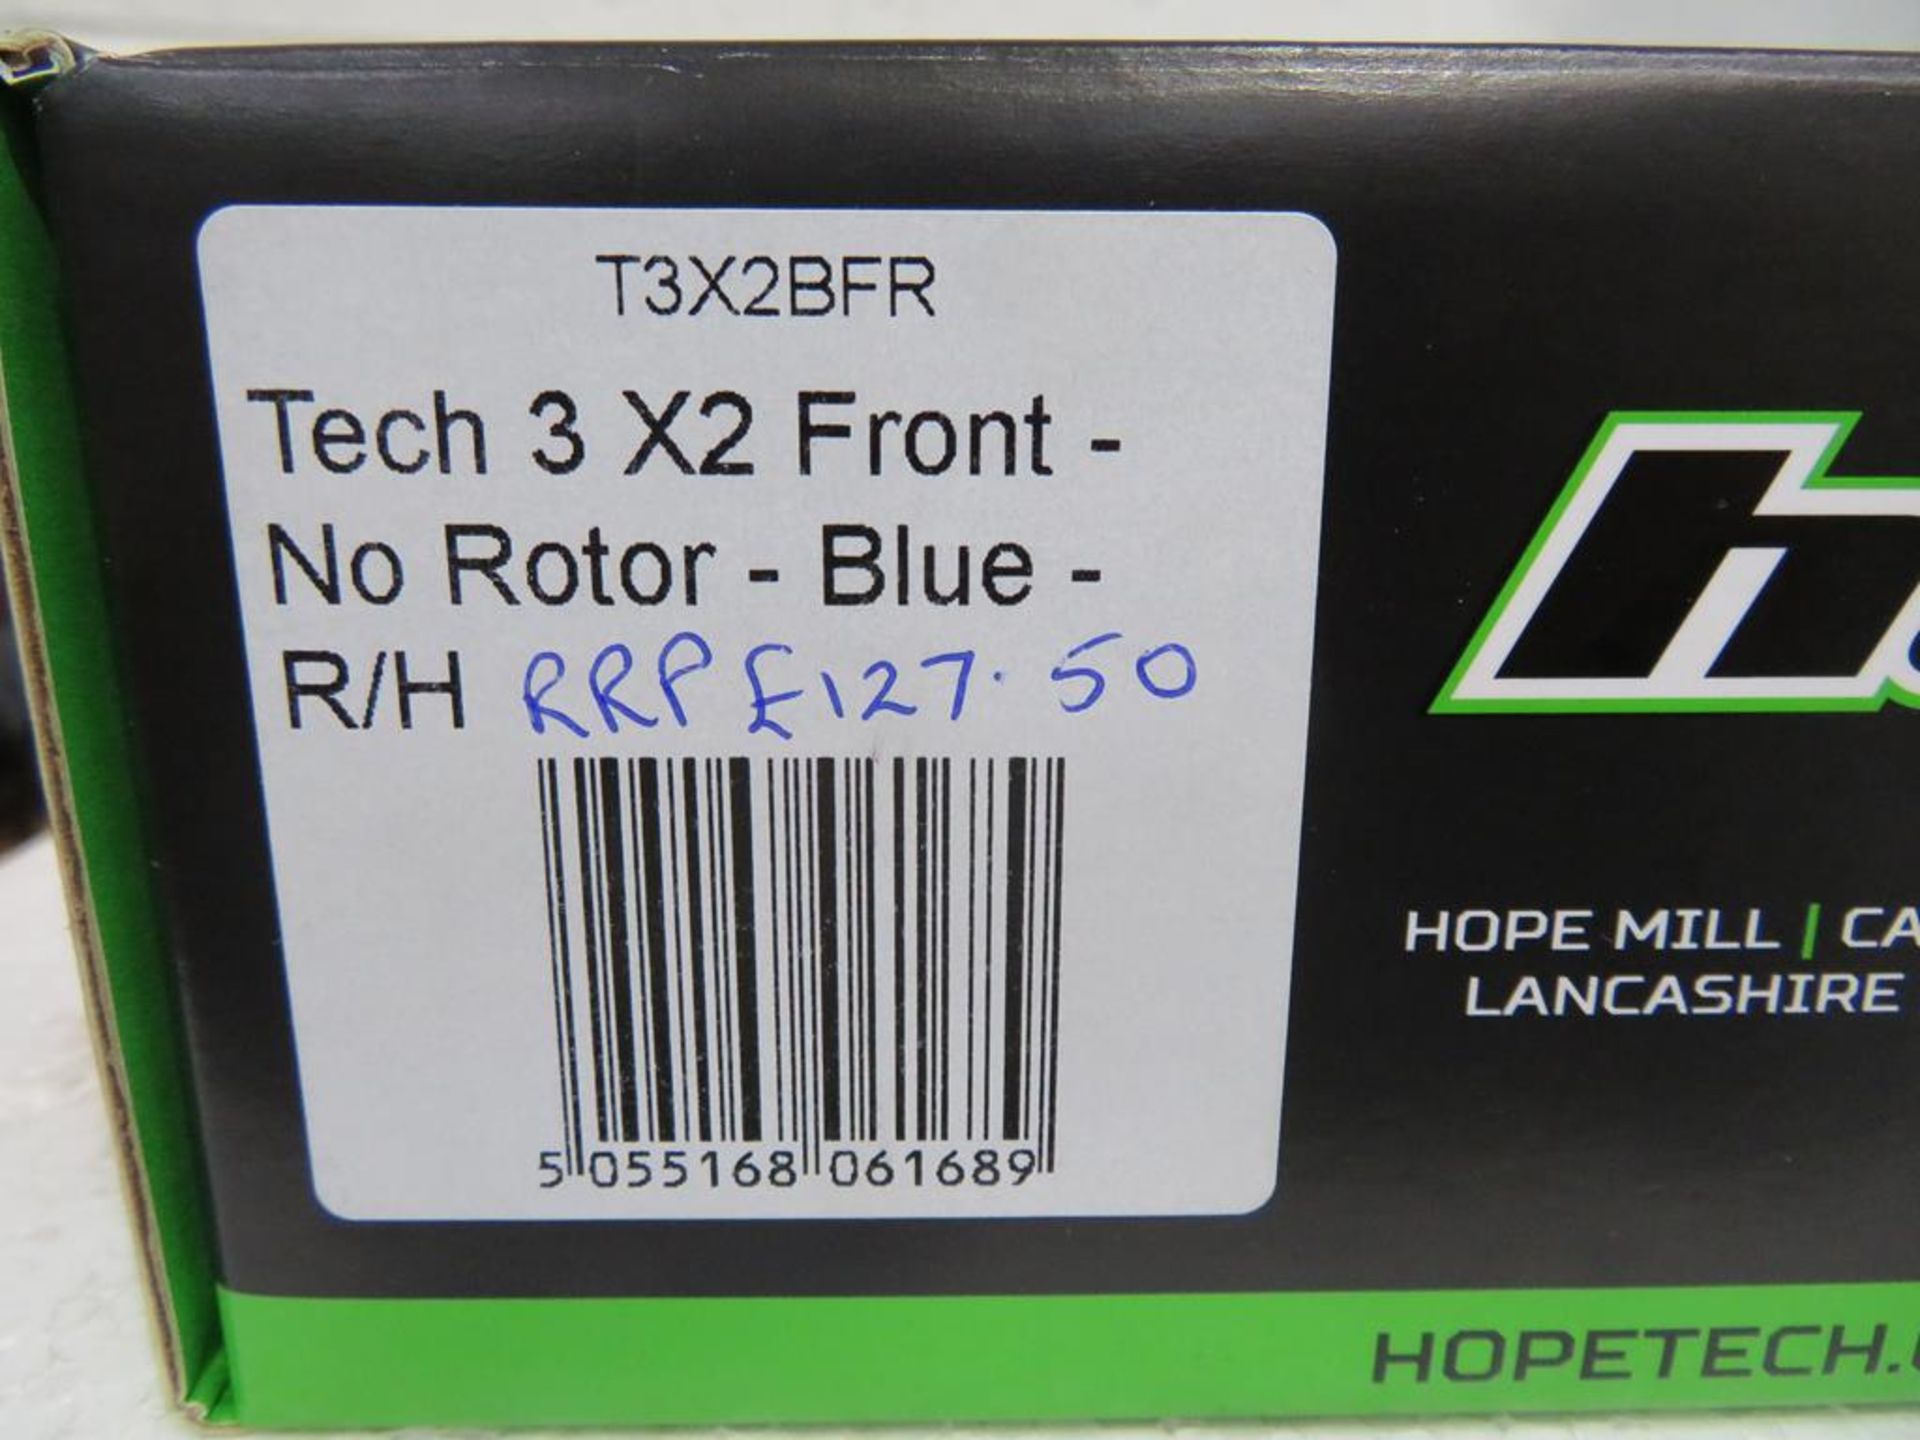 Hope Tech 3 X 2 Front-No Rotor-Blue- R/M Disc Brake - Image 2 of 3